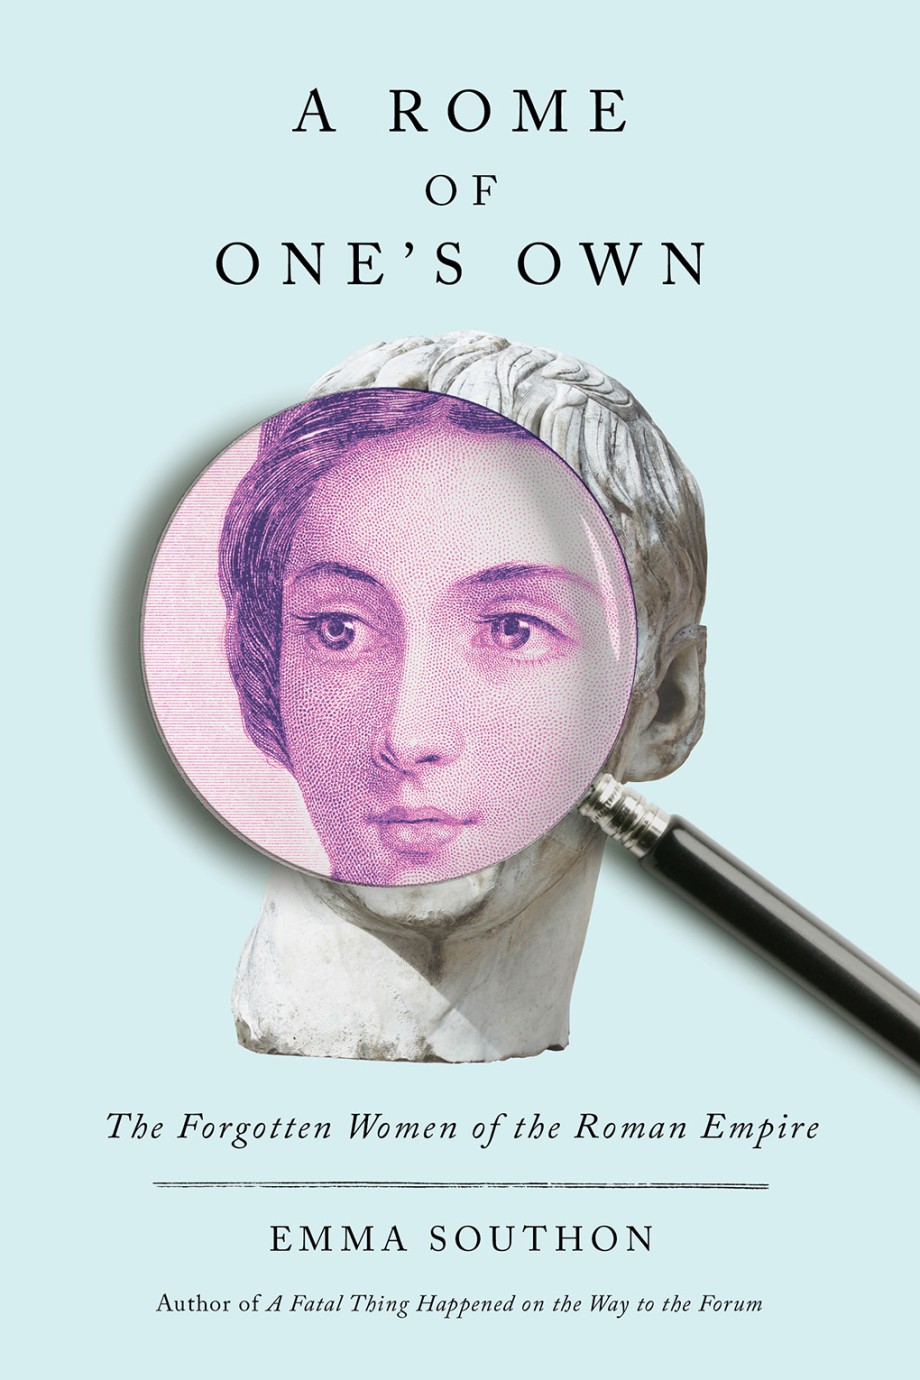 Rome of One's Own The Forgotten Women of the Roman Empire